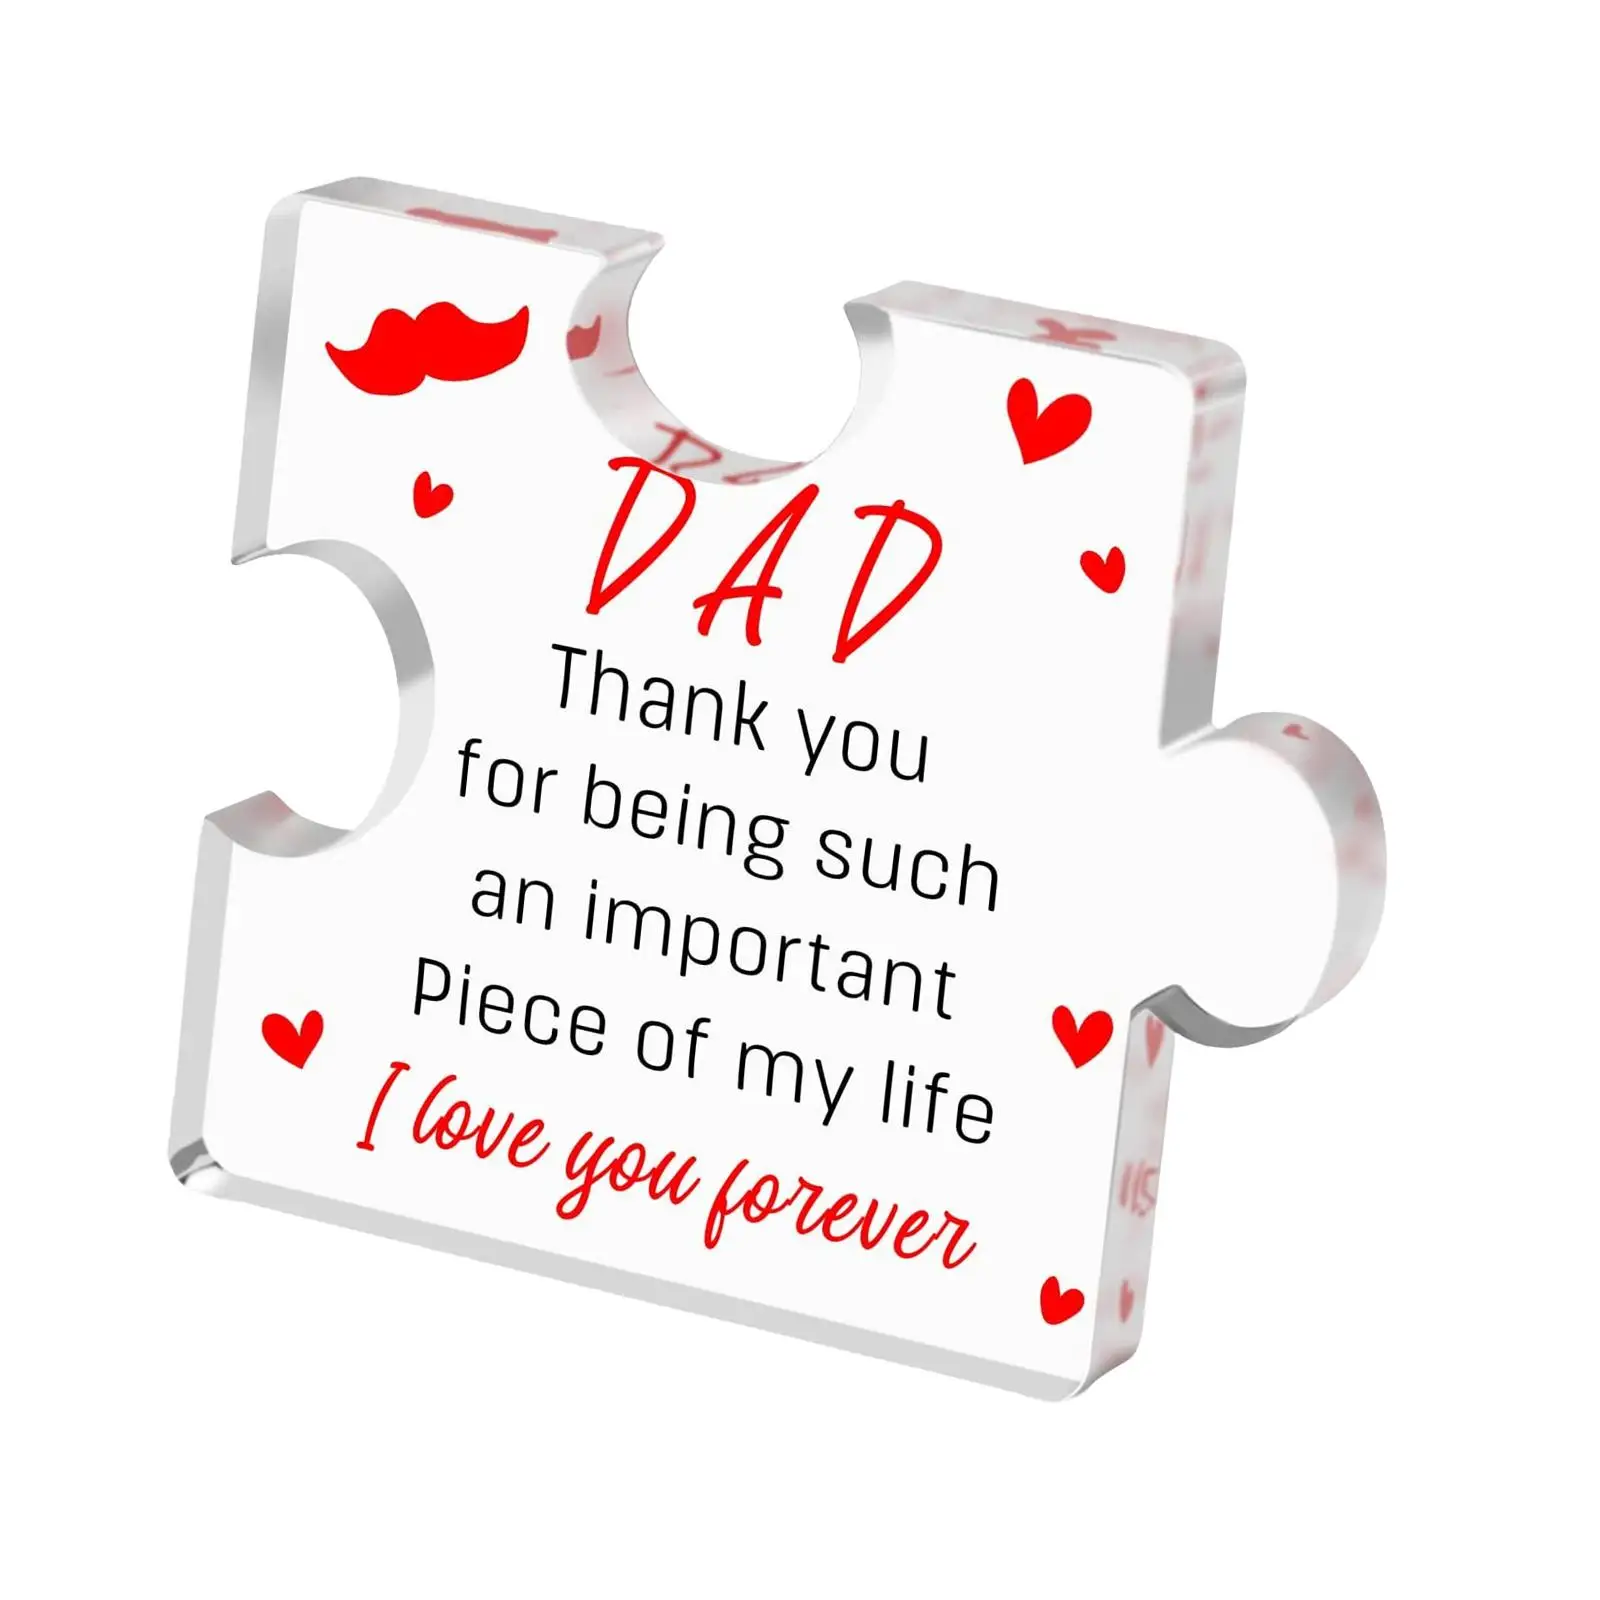 Fathers Day Present, Acrylic Block Puzzle, Cool Dad Presents, Heartwarming Father Day Puzzle Sign, Birthday Gifts